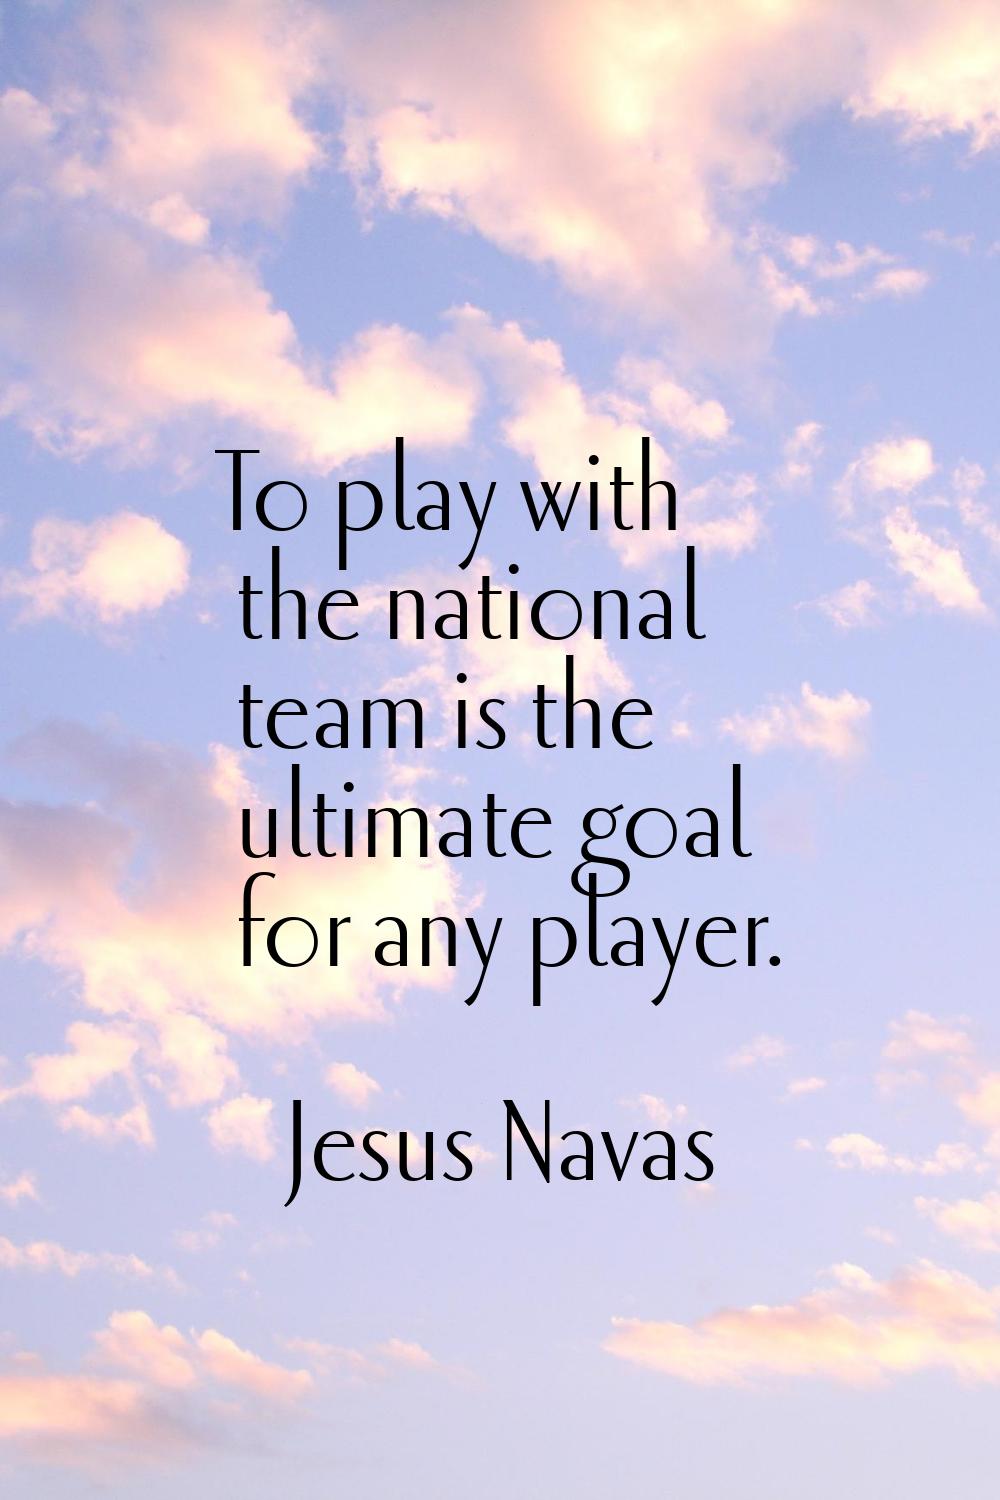 To play with the national team is the ultimate goal for any player.